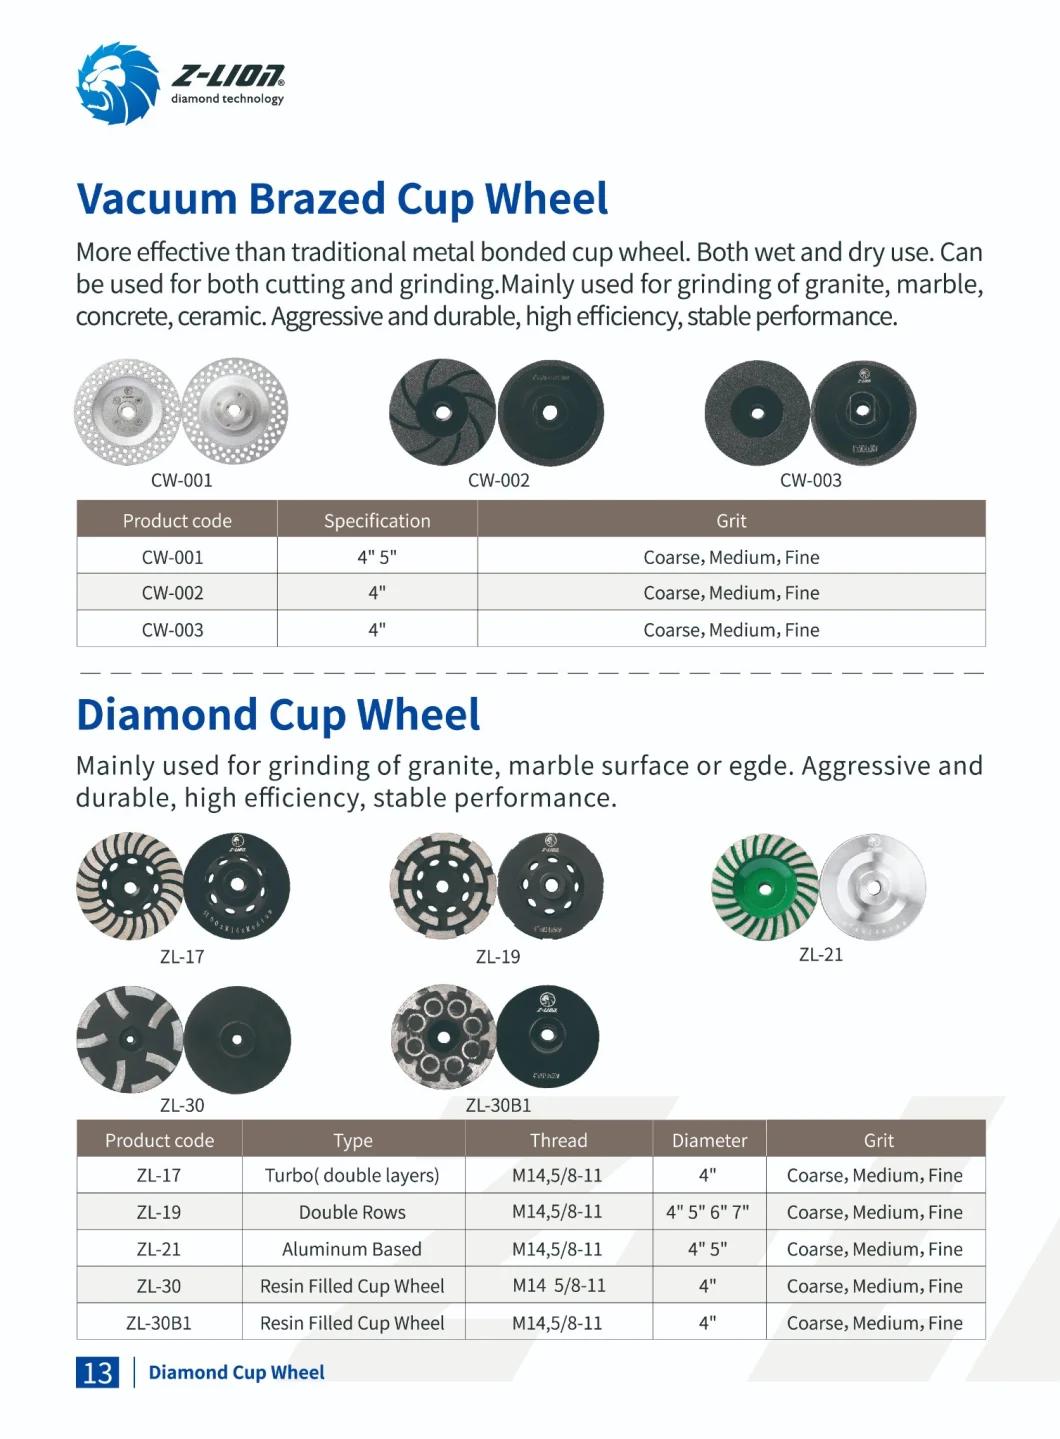 Vacuum Brazed Cup Wheel for Granite, Marble, Concrete, Ceramic Cutting and Grinding